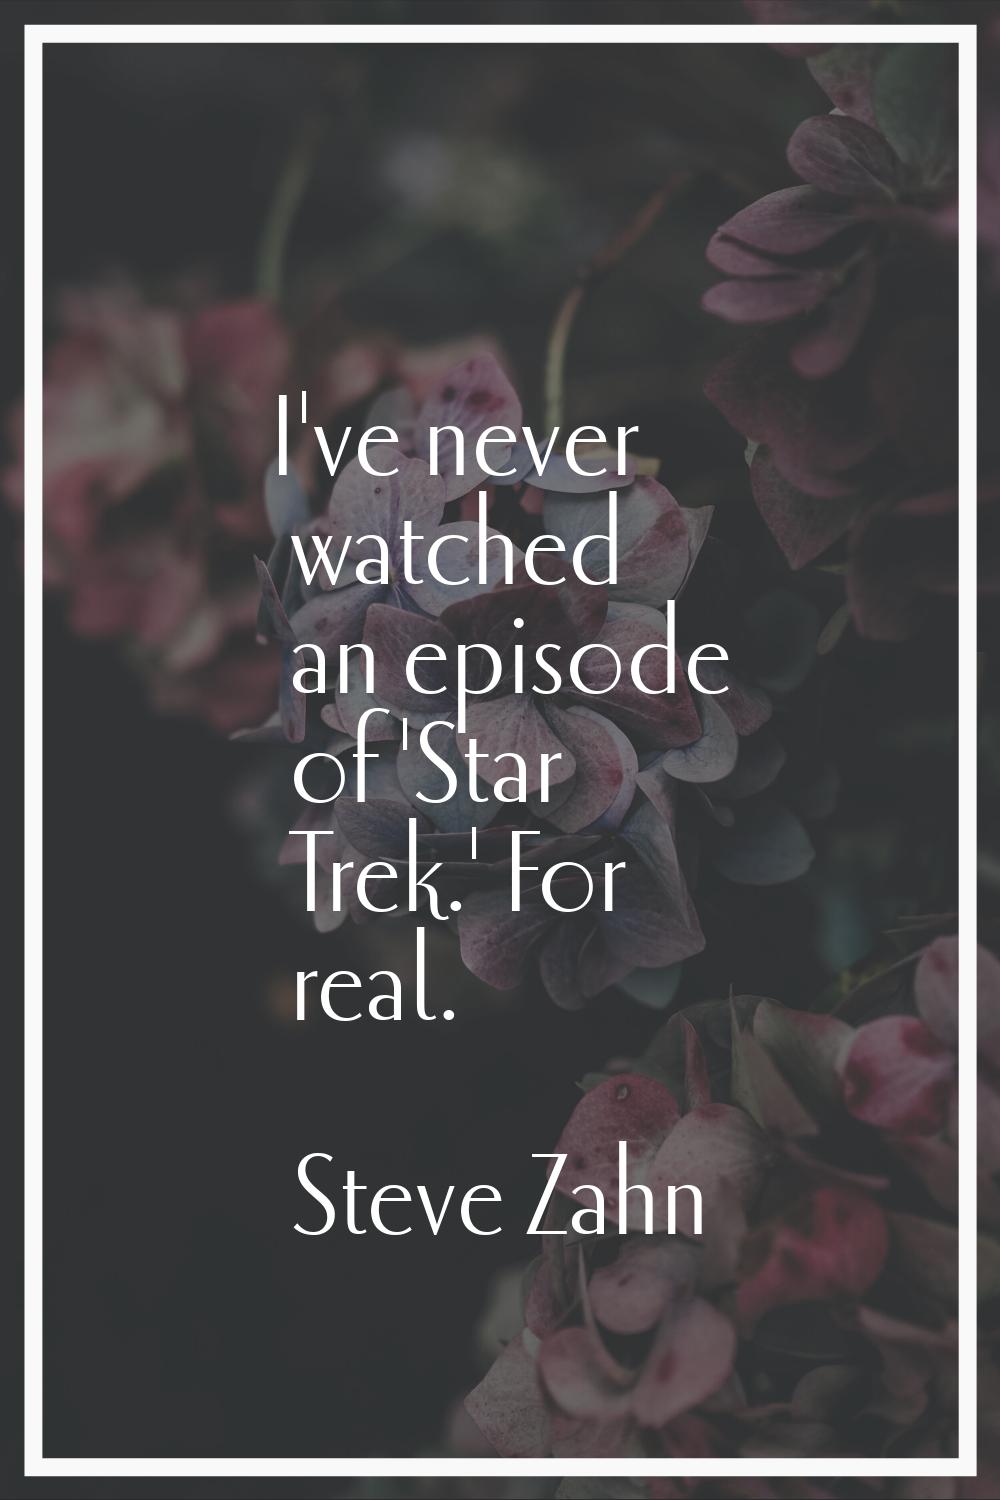 I've never watched an episode of 'Star Trek.' For real.